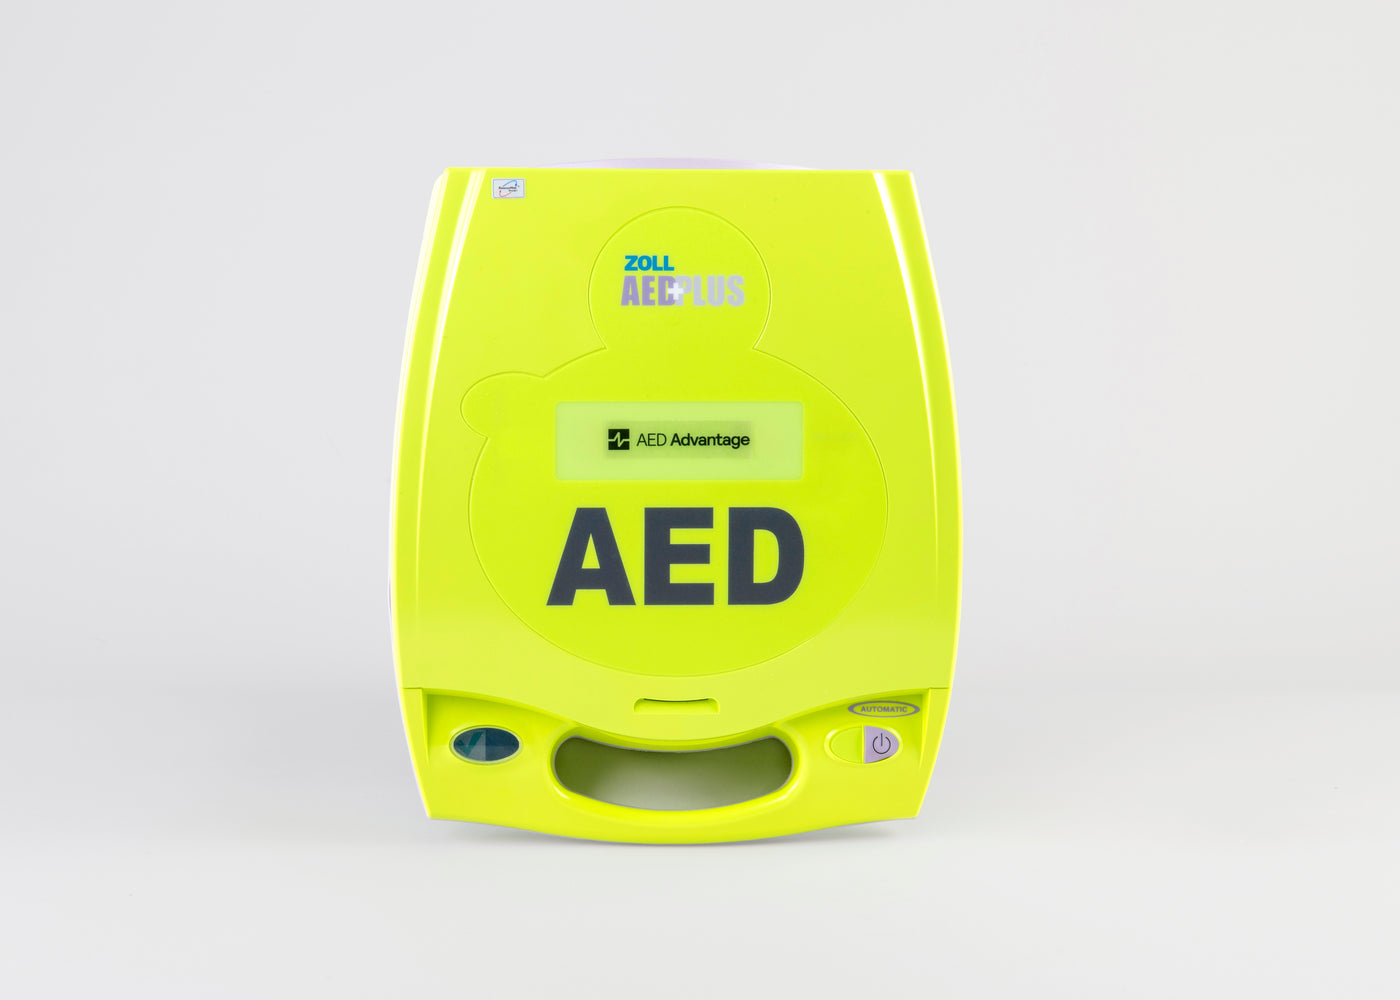 A green ZOLL AED Plus machine displayed with a gray background